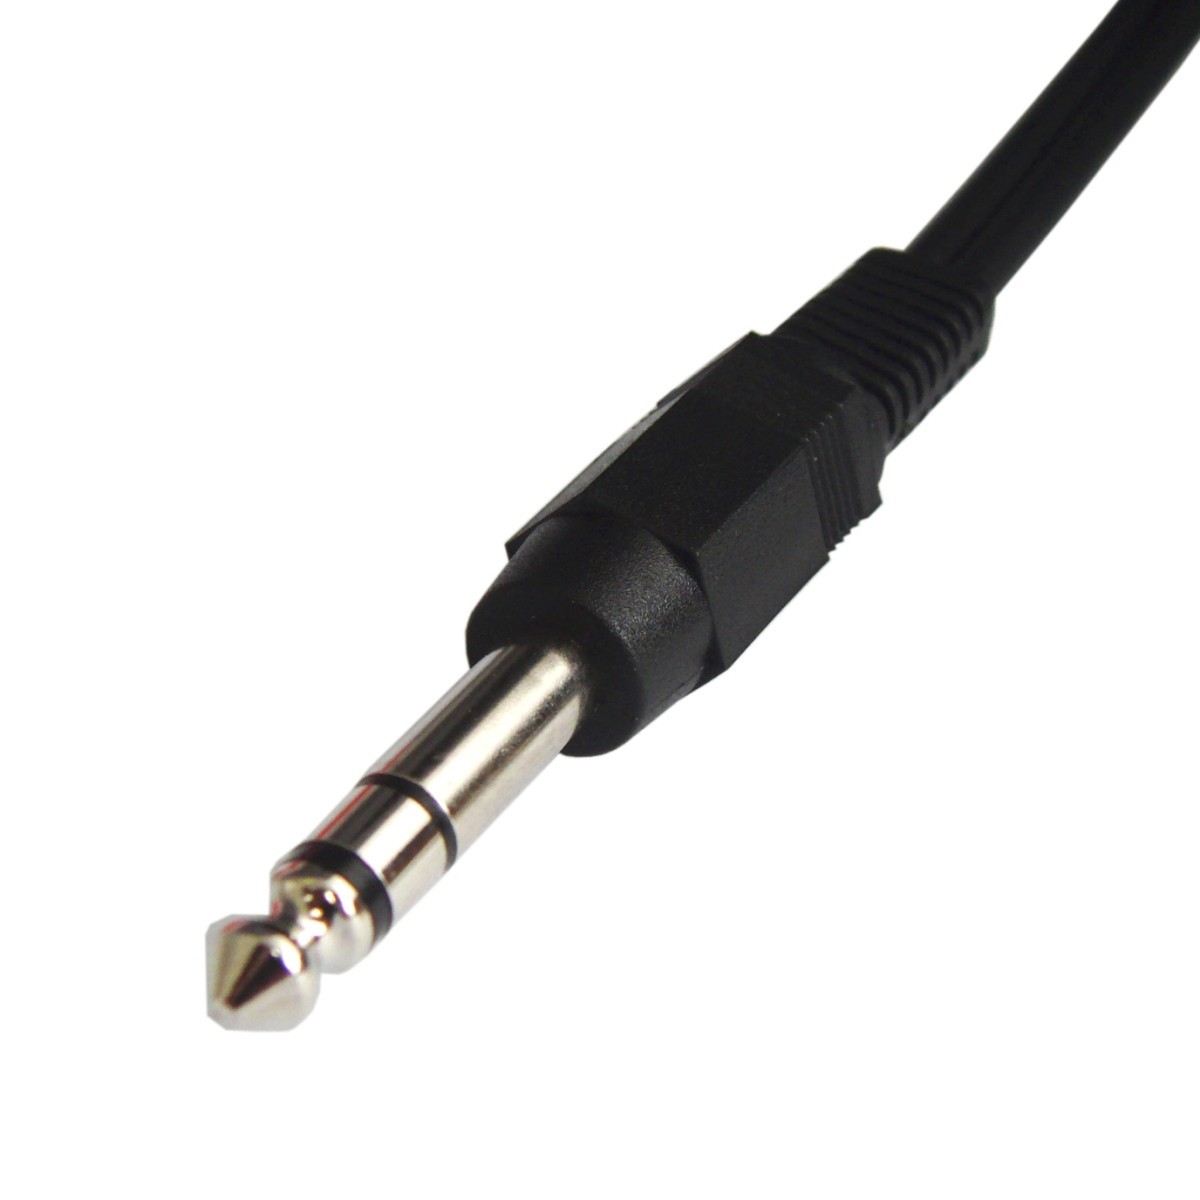  audio conversion cable RCA / pin plug ×2( red. white ) - 6.3mm stereo standard plug 1m VM-RRS-1m